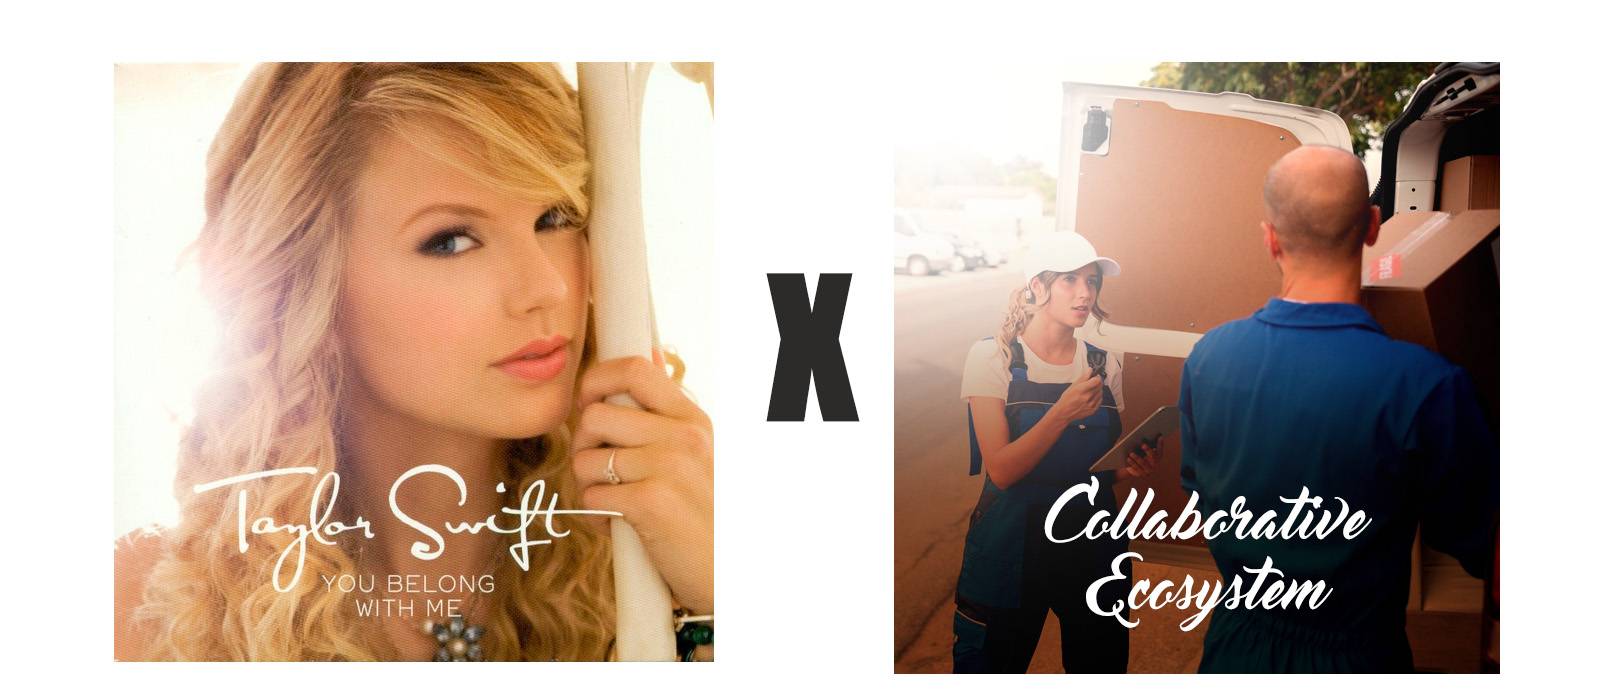 Taylor Swift You Belong with Me x Collaborative Ecosystem